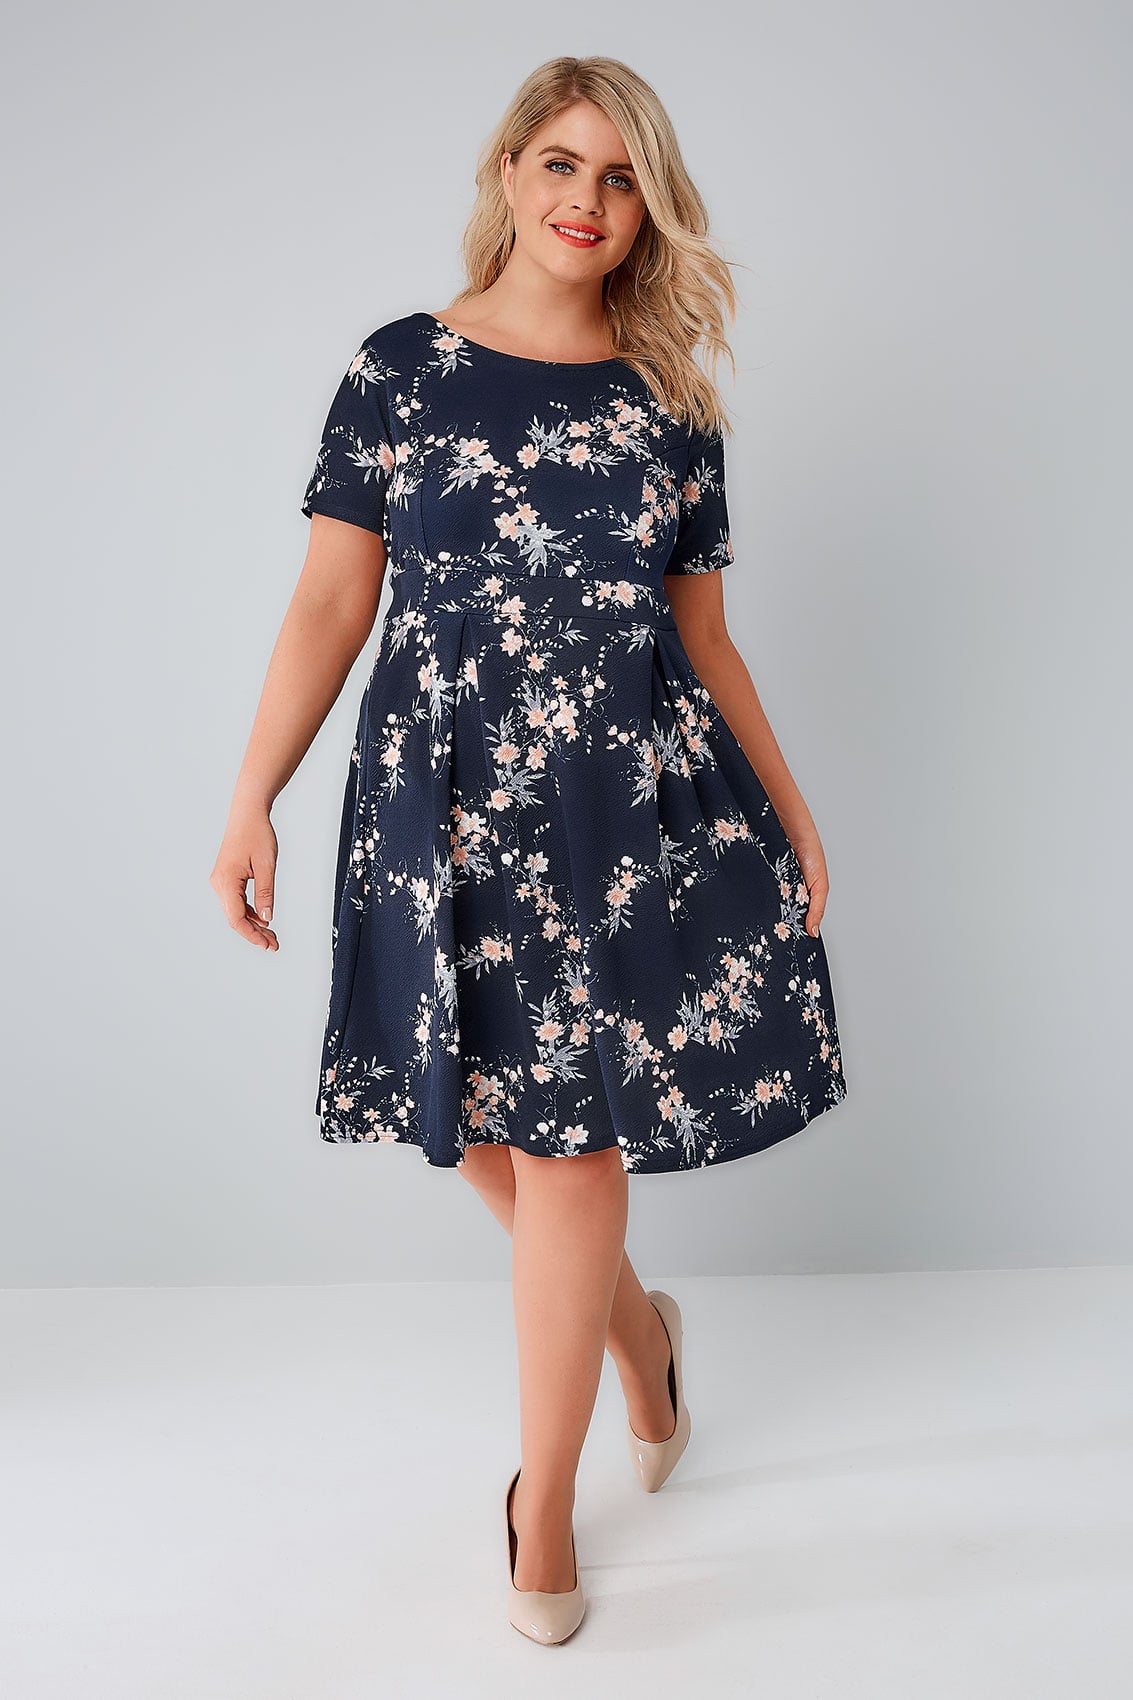 SIENNA COUTURE Navy & Multi Floral Sleeved Skater Dress, Plus size 16 to 26